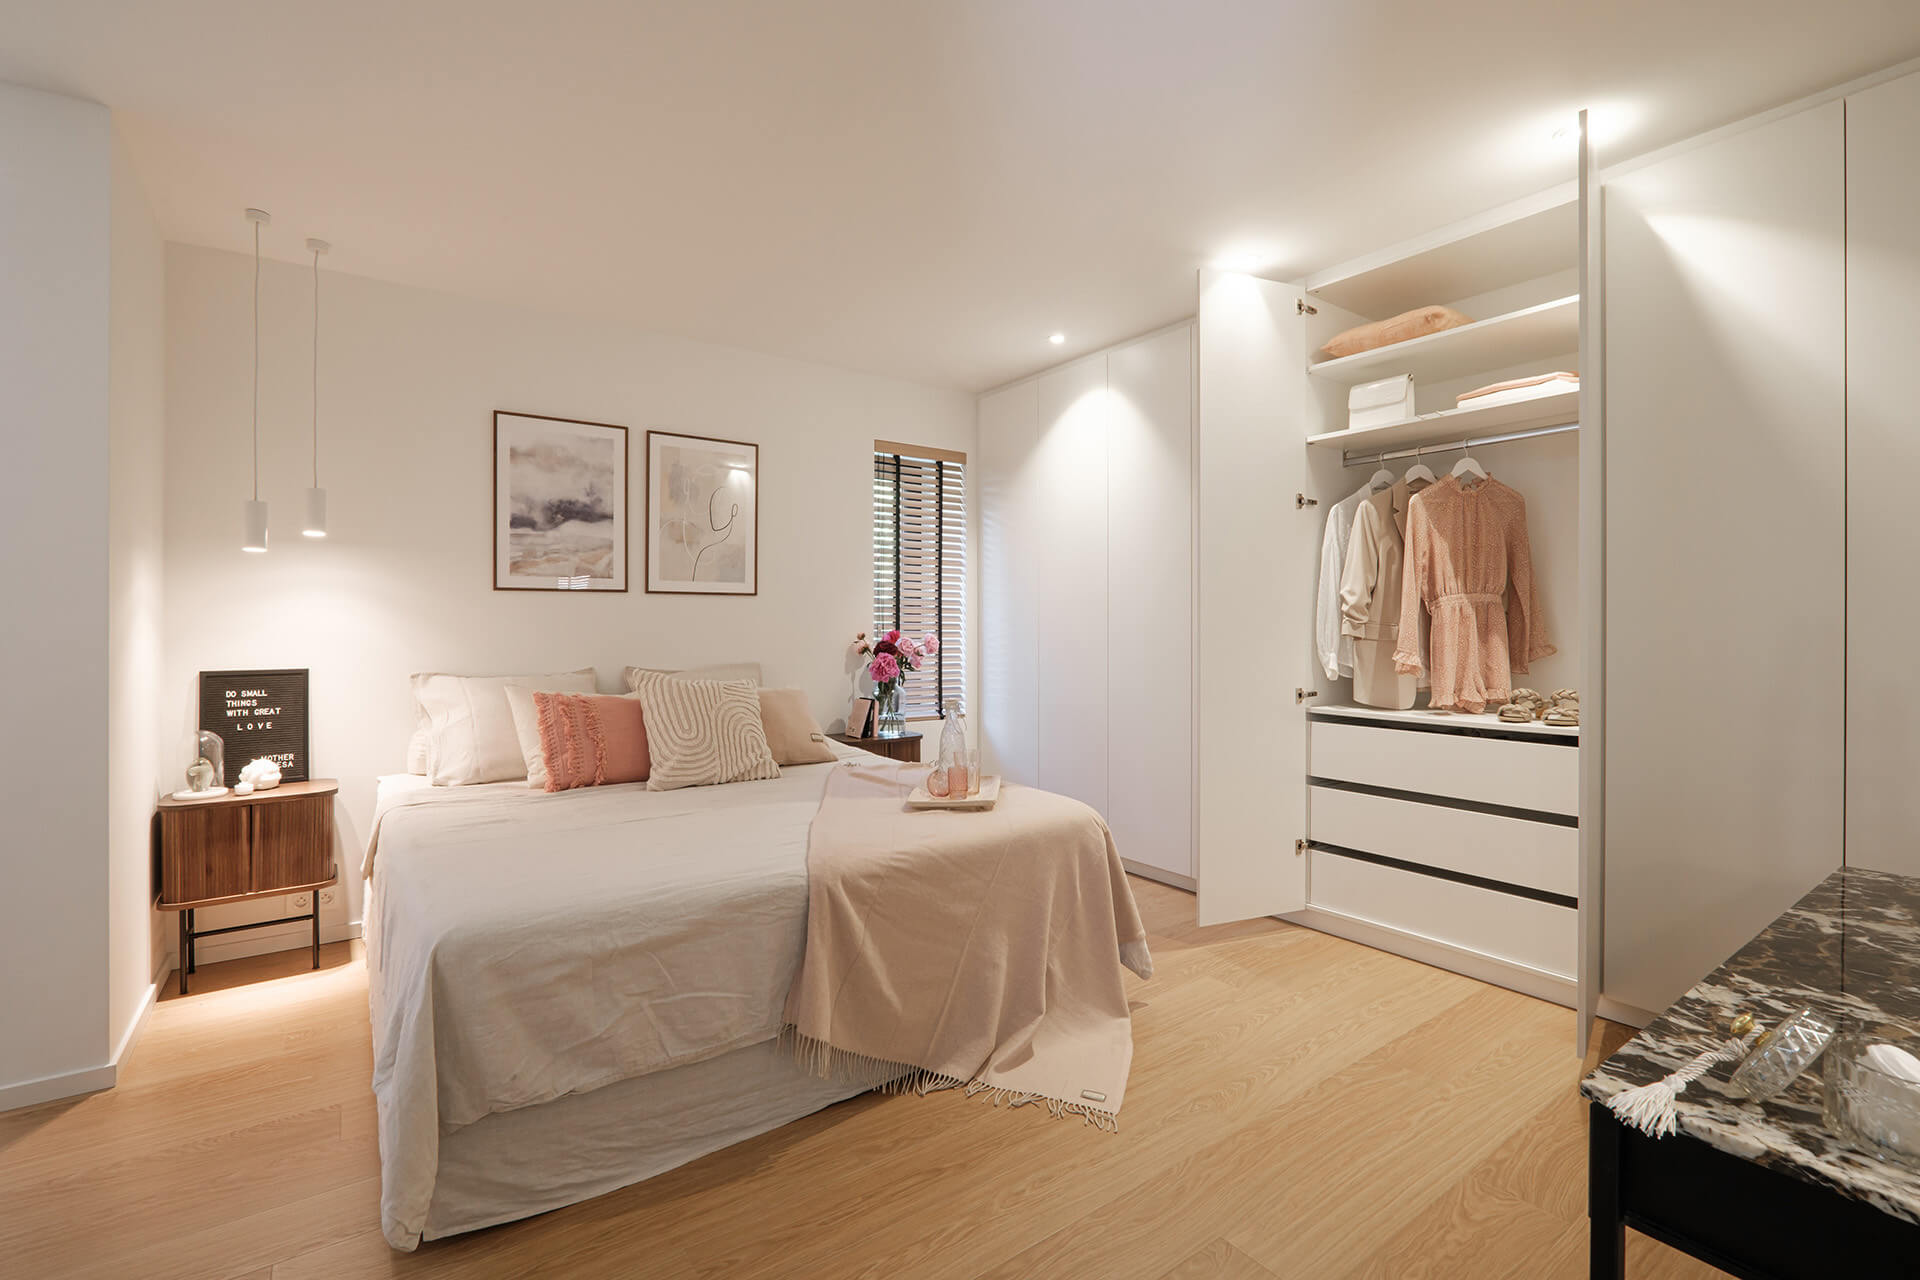 Built-in dressing closet between 2 walls in a bedroom with a pink touchOnline in a bedroom with pink accents